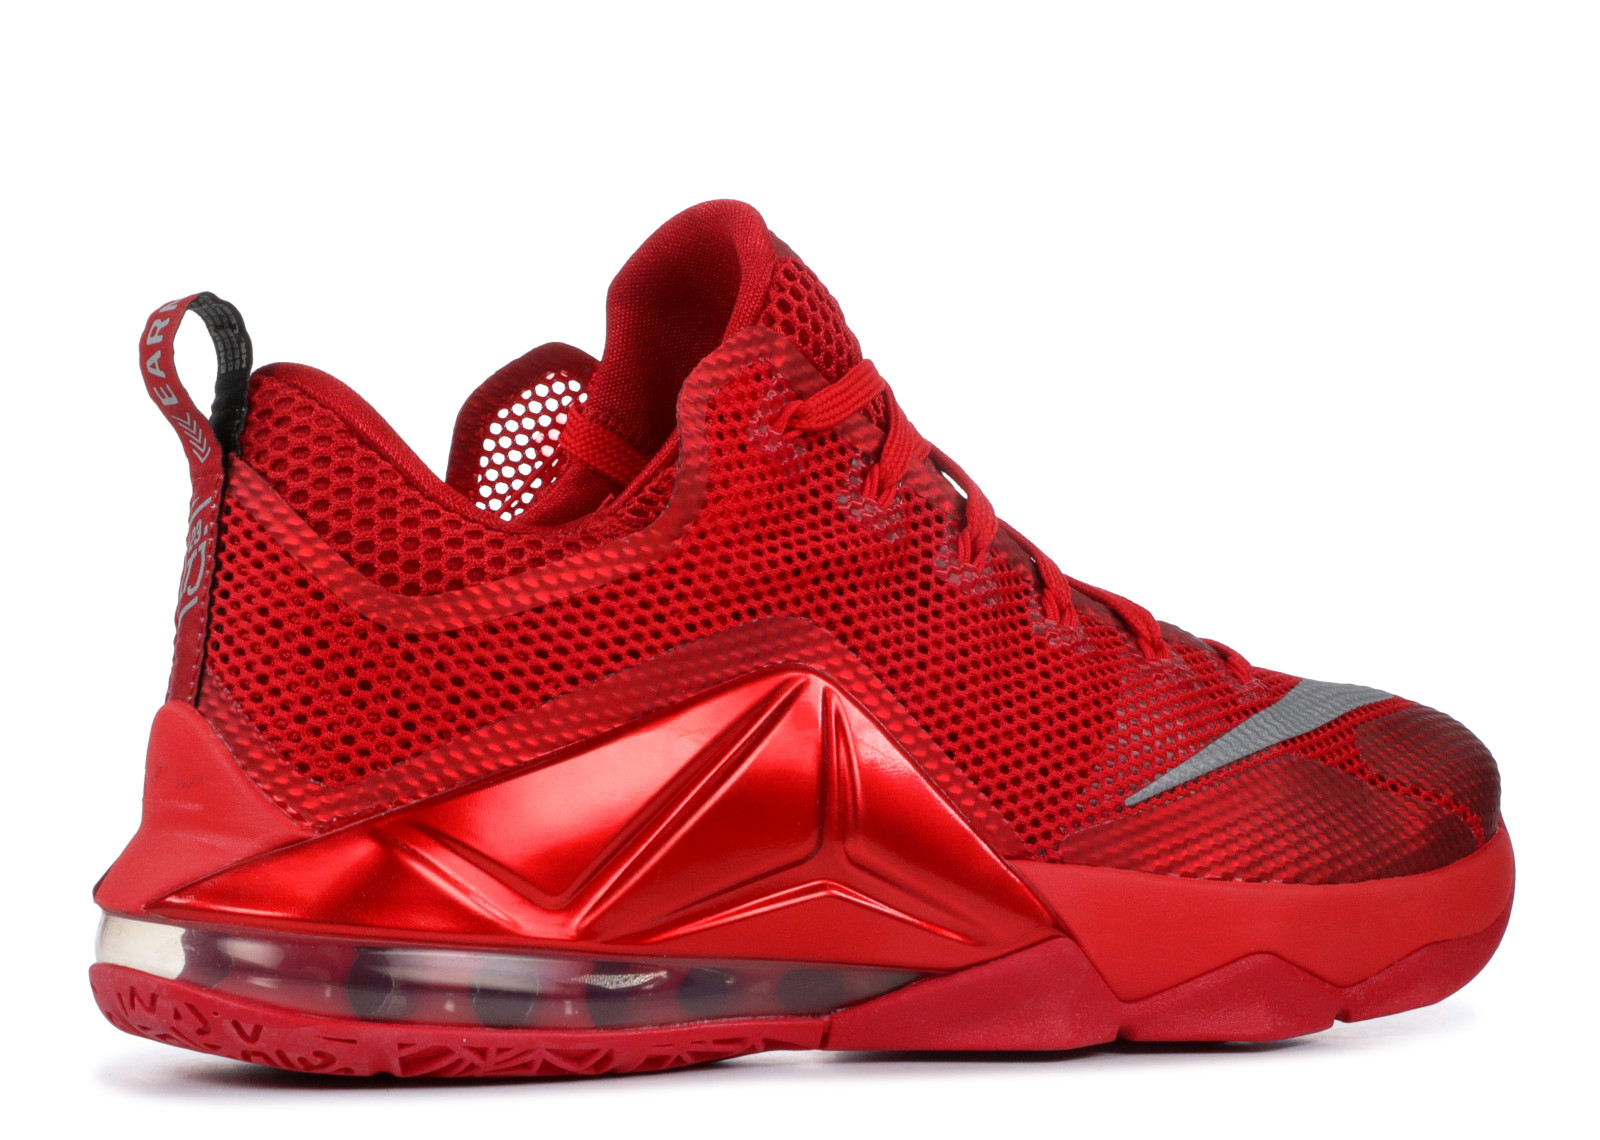 Nike Men's Lebron XII Low Unvrsty Rd/Rflct Slvr/Gym Rd/B Basketball Shoes - image 3 of 3